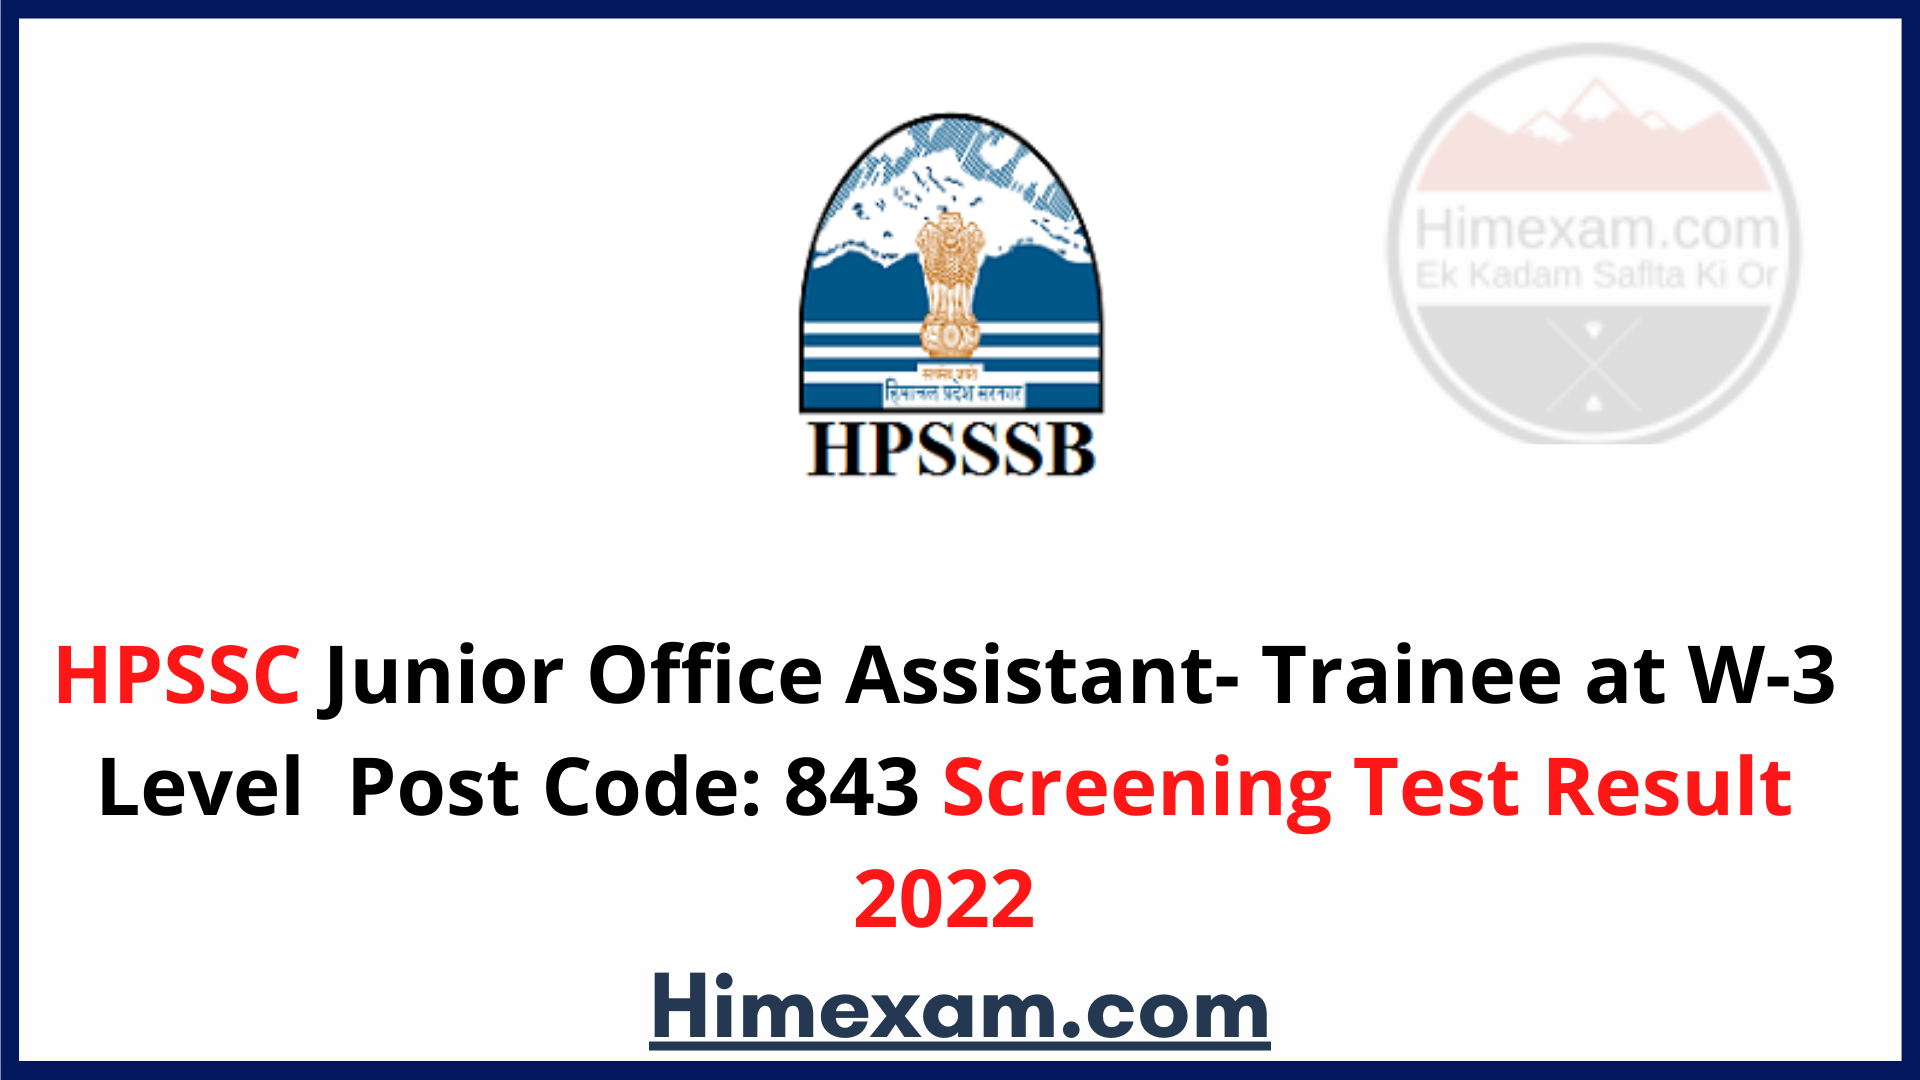 HPSSC Junior Office Assistant- Trainee at W-3 Level  Post Code: 843 Screening Test Result 2022